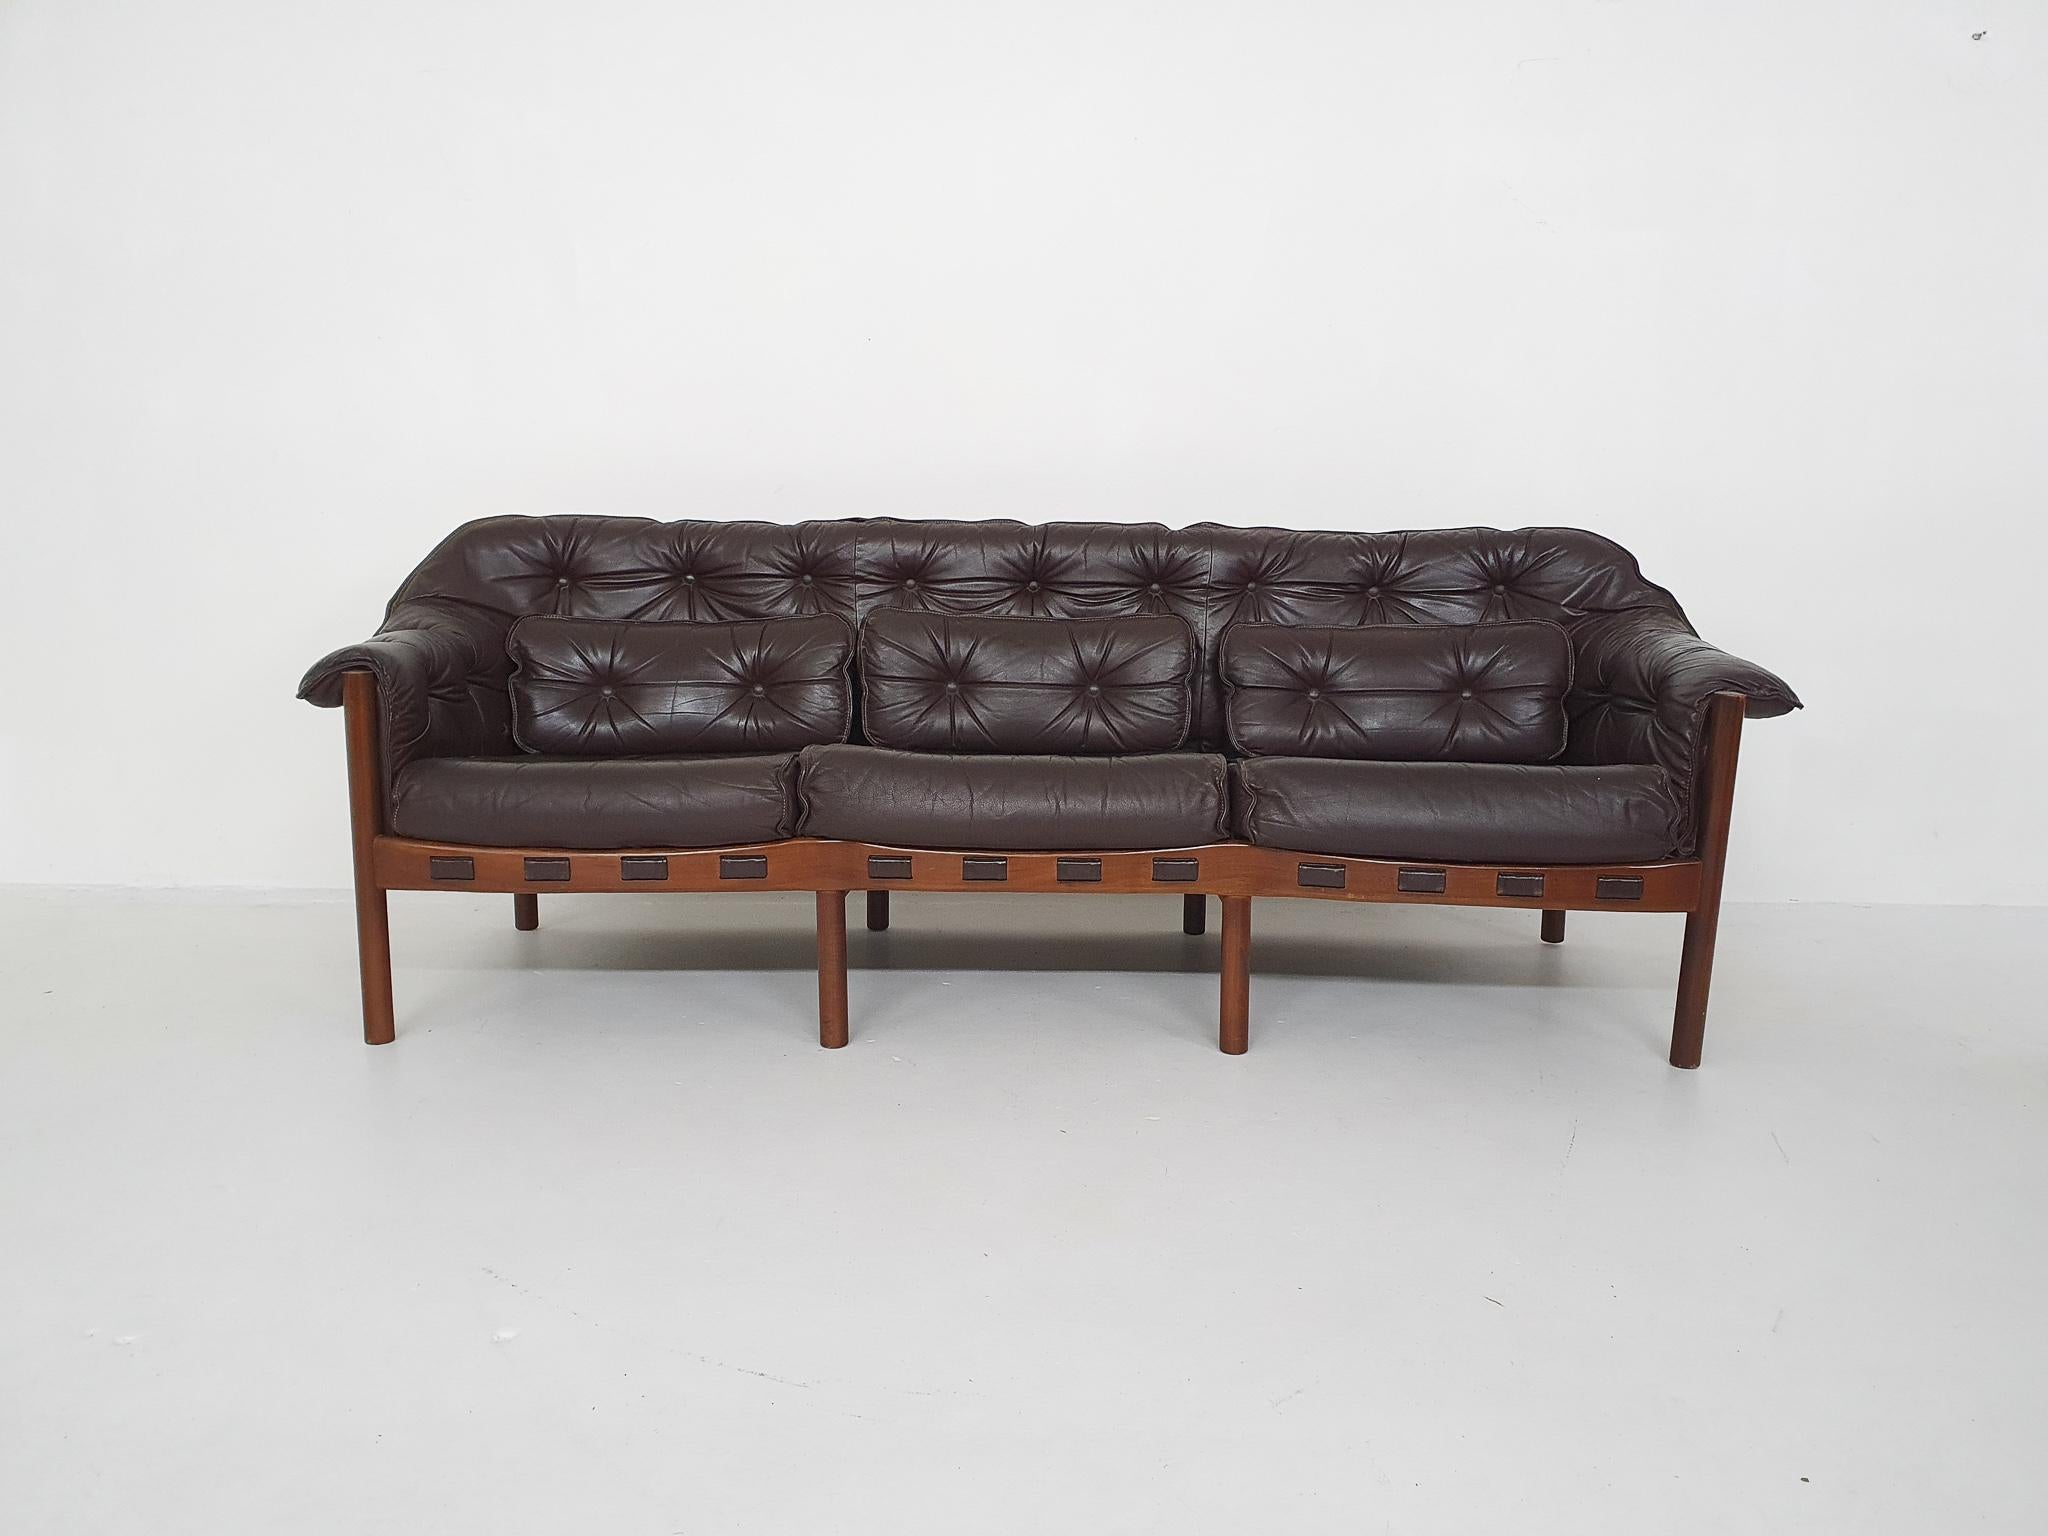 Wooden three seater sofa with dark brown leather cushions. In good original condition. With new springs.